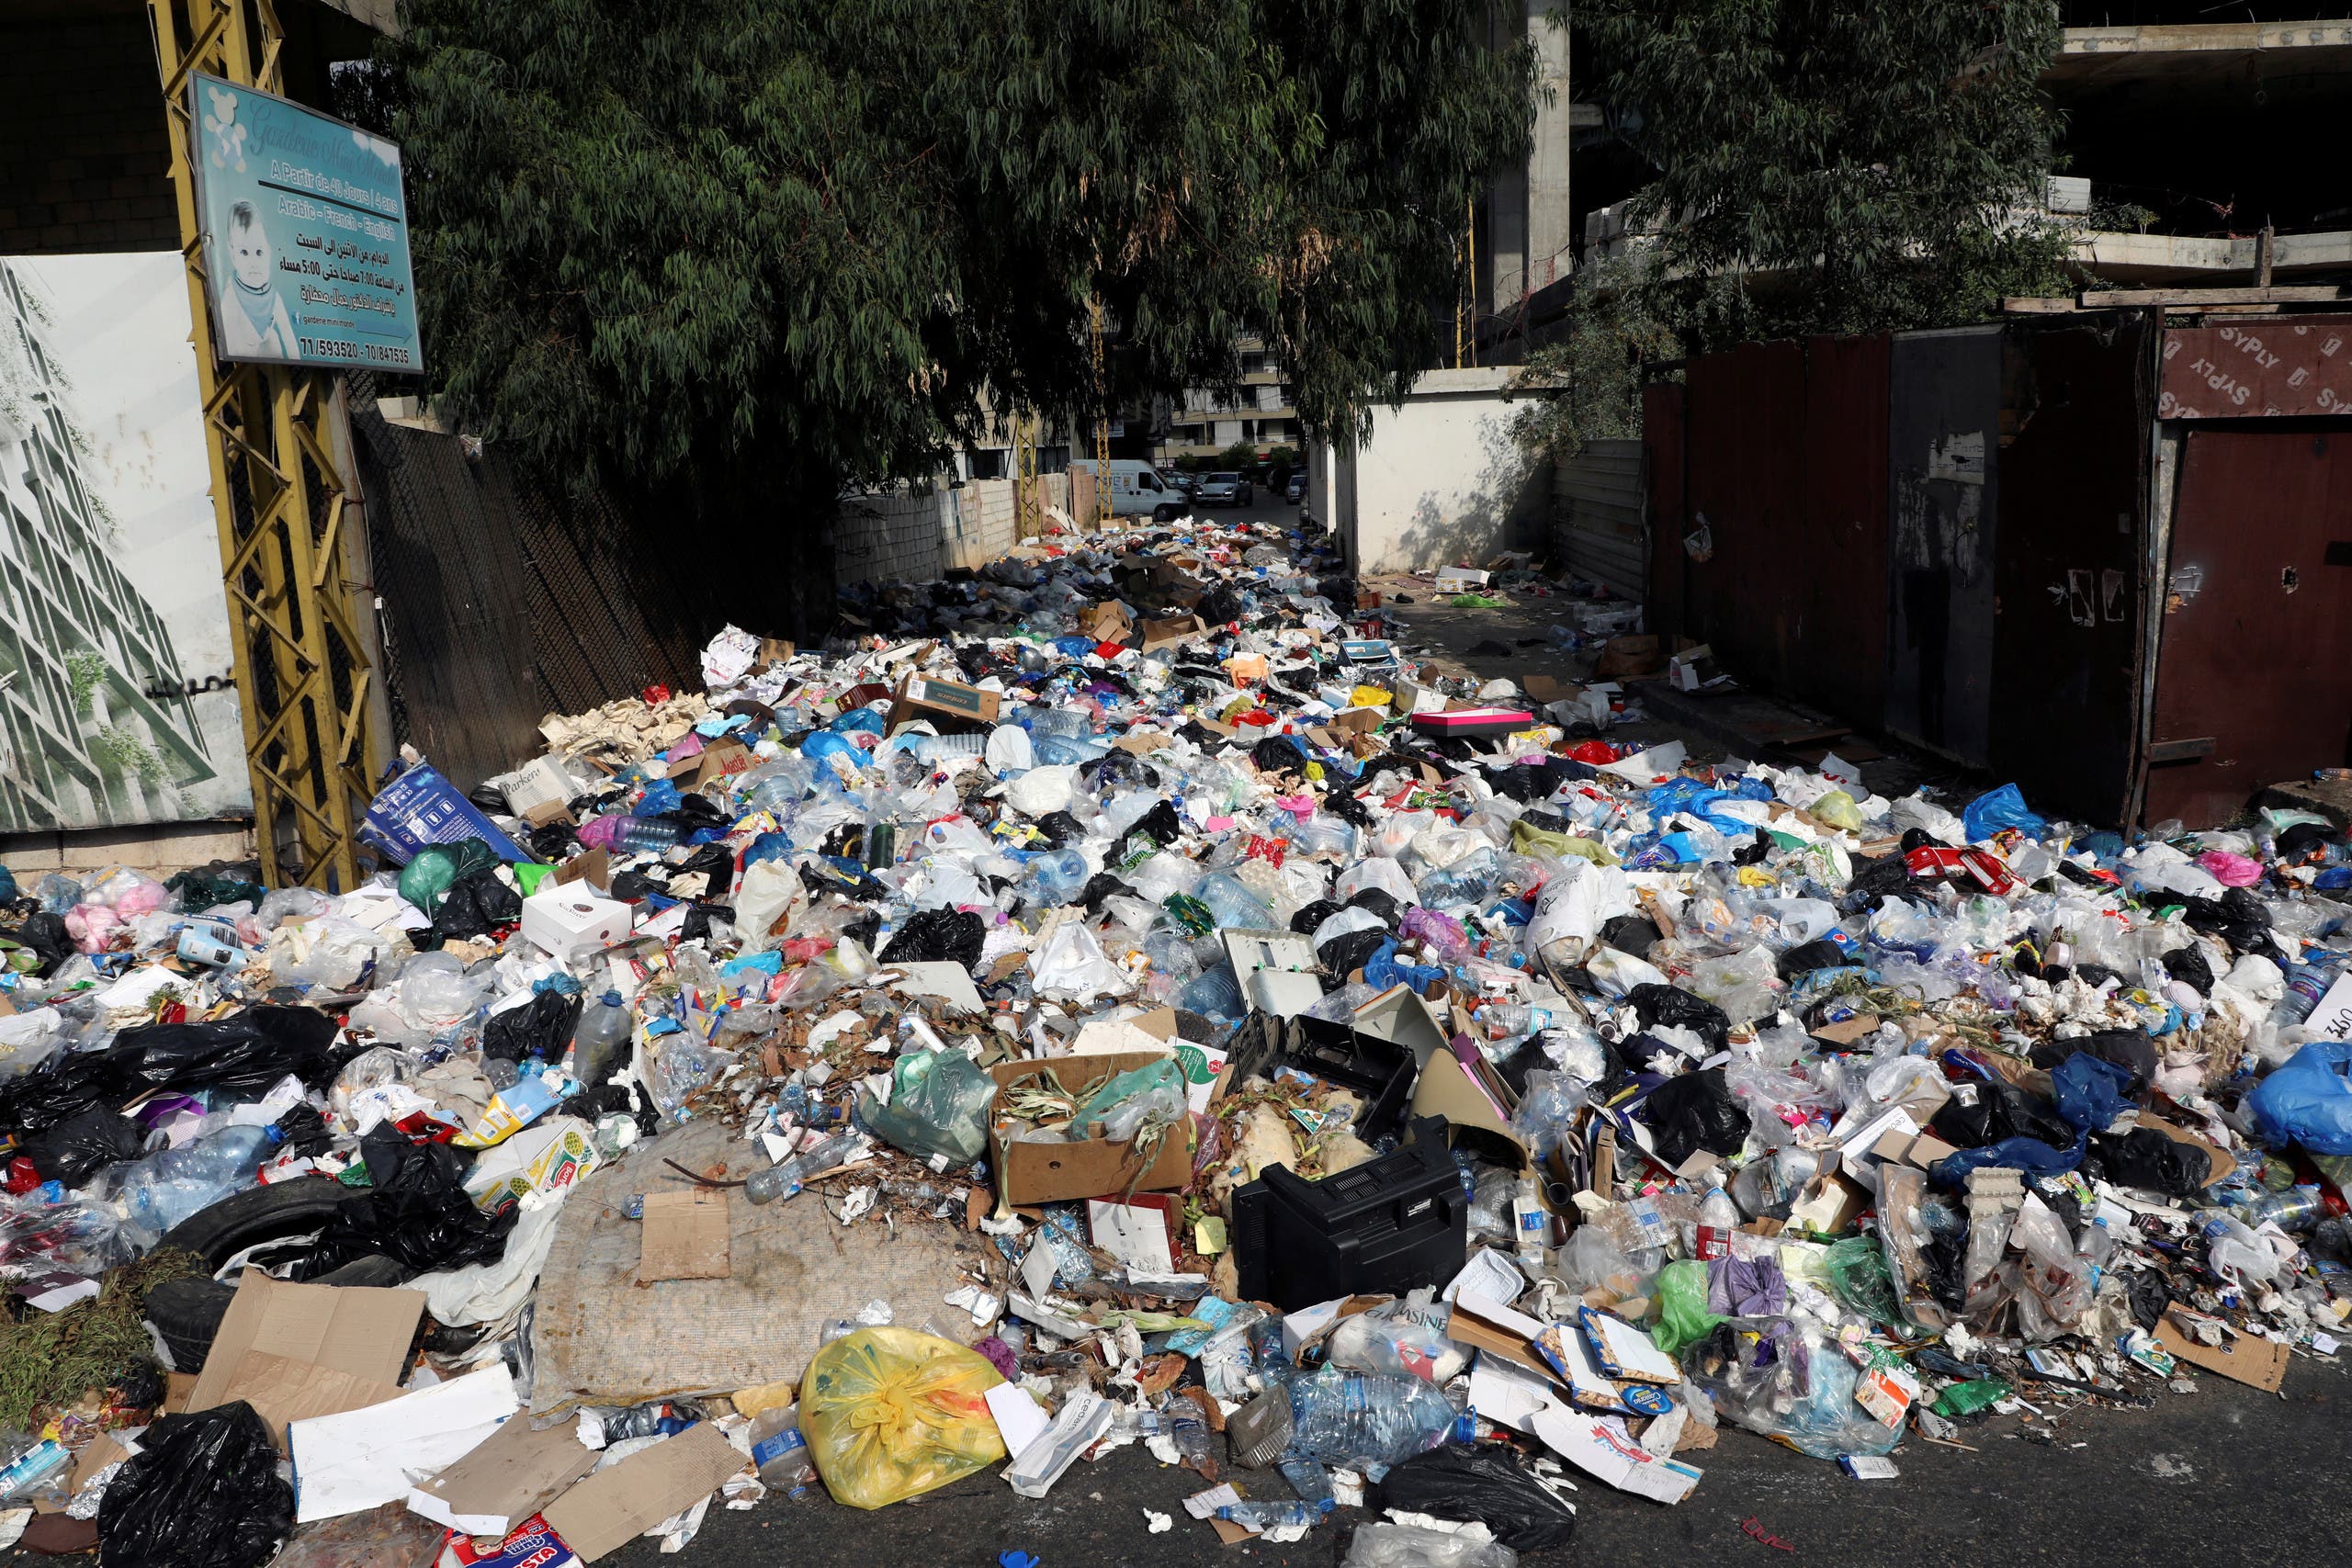 Rubbish piled up is seen along a street in Ain el-Remmaneh, Lebanon September 21, 2020. (Reuters)